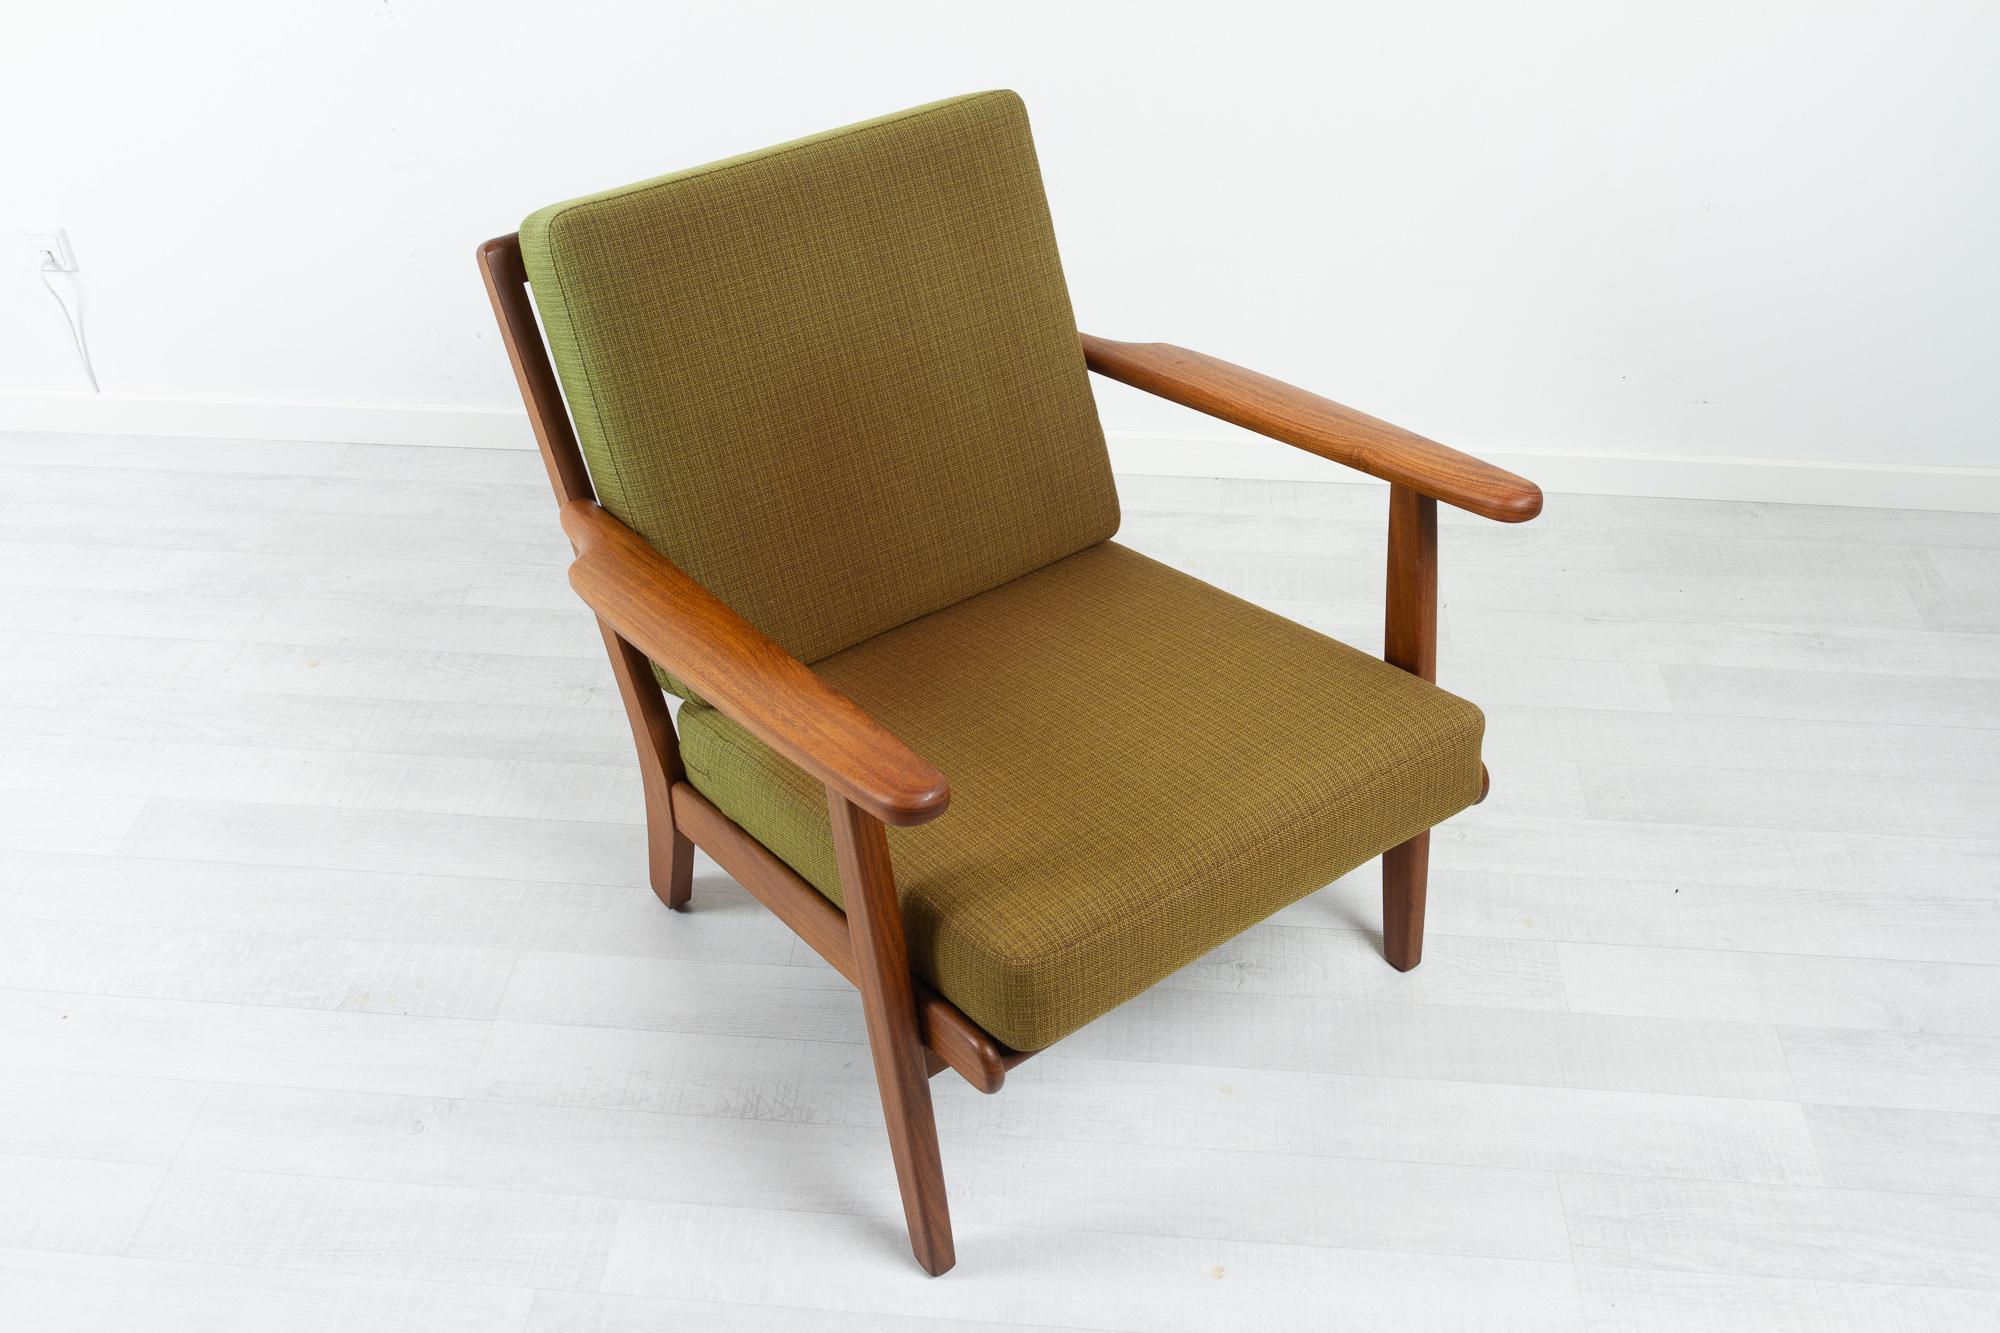 Mid-20th Century Vintage Danish Lounge Chair by Aage Pedersen for Getama, 1960s For Sale